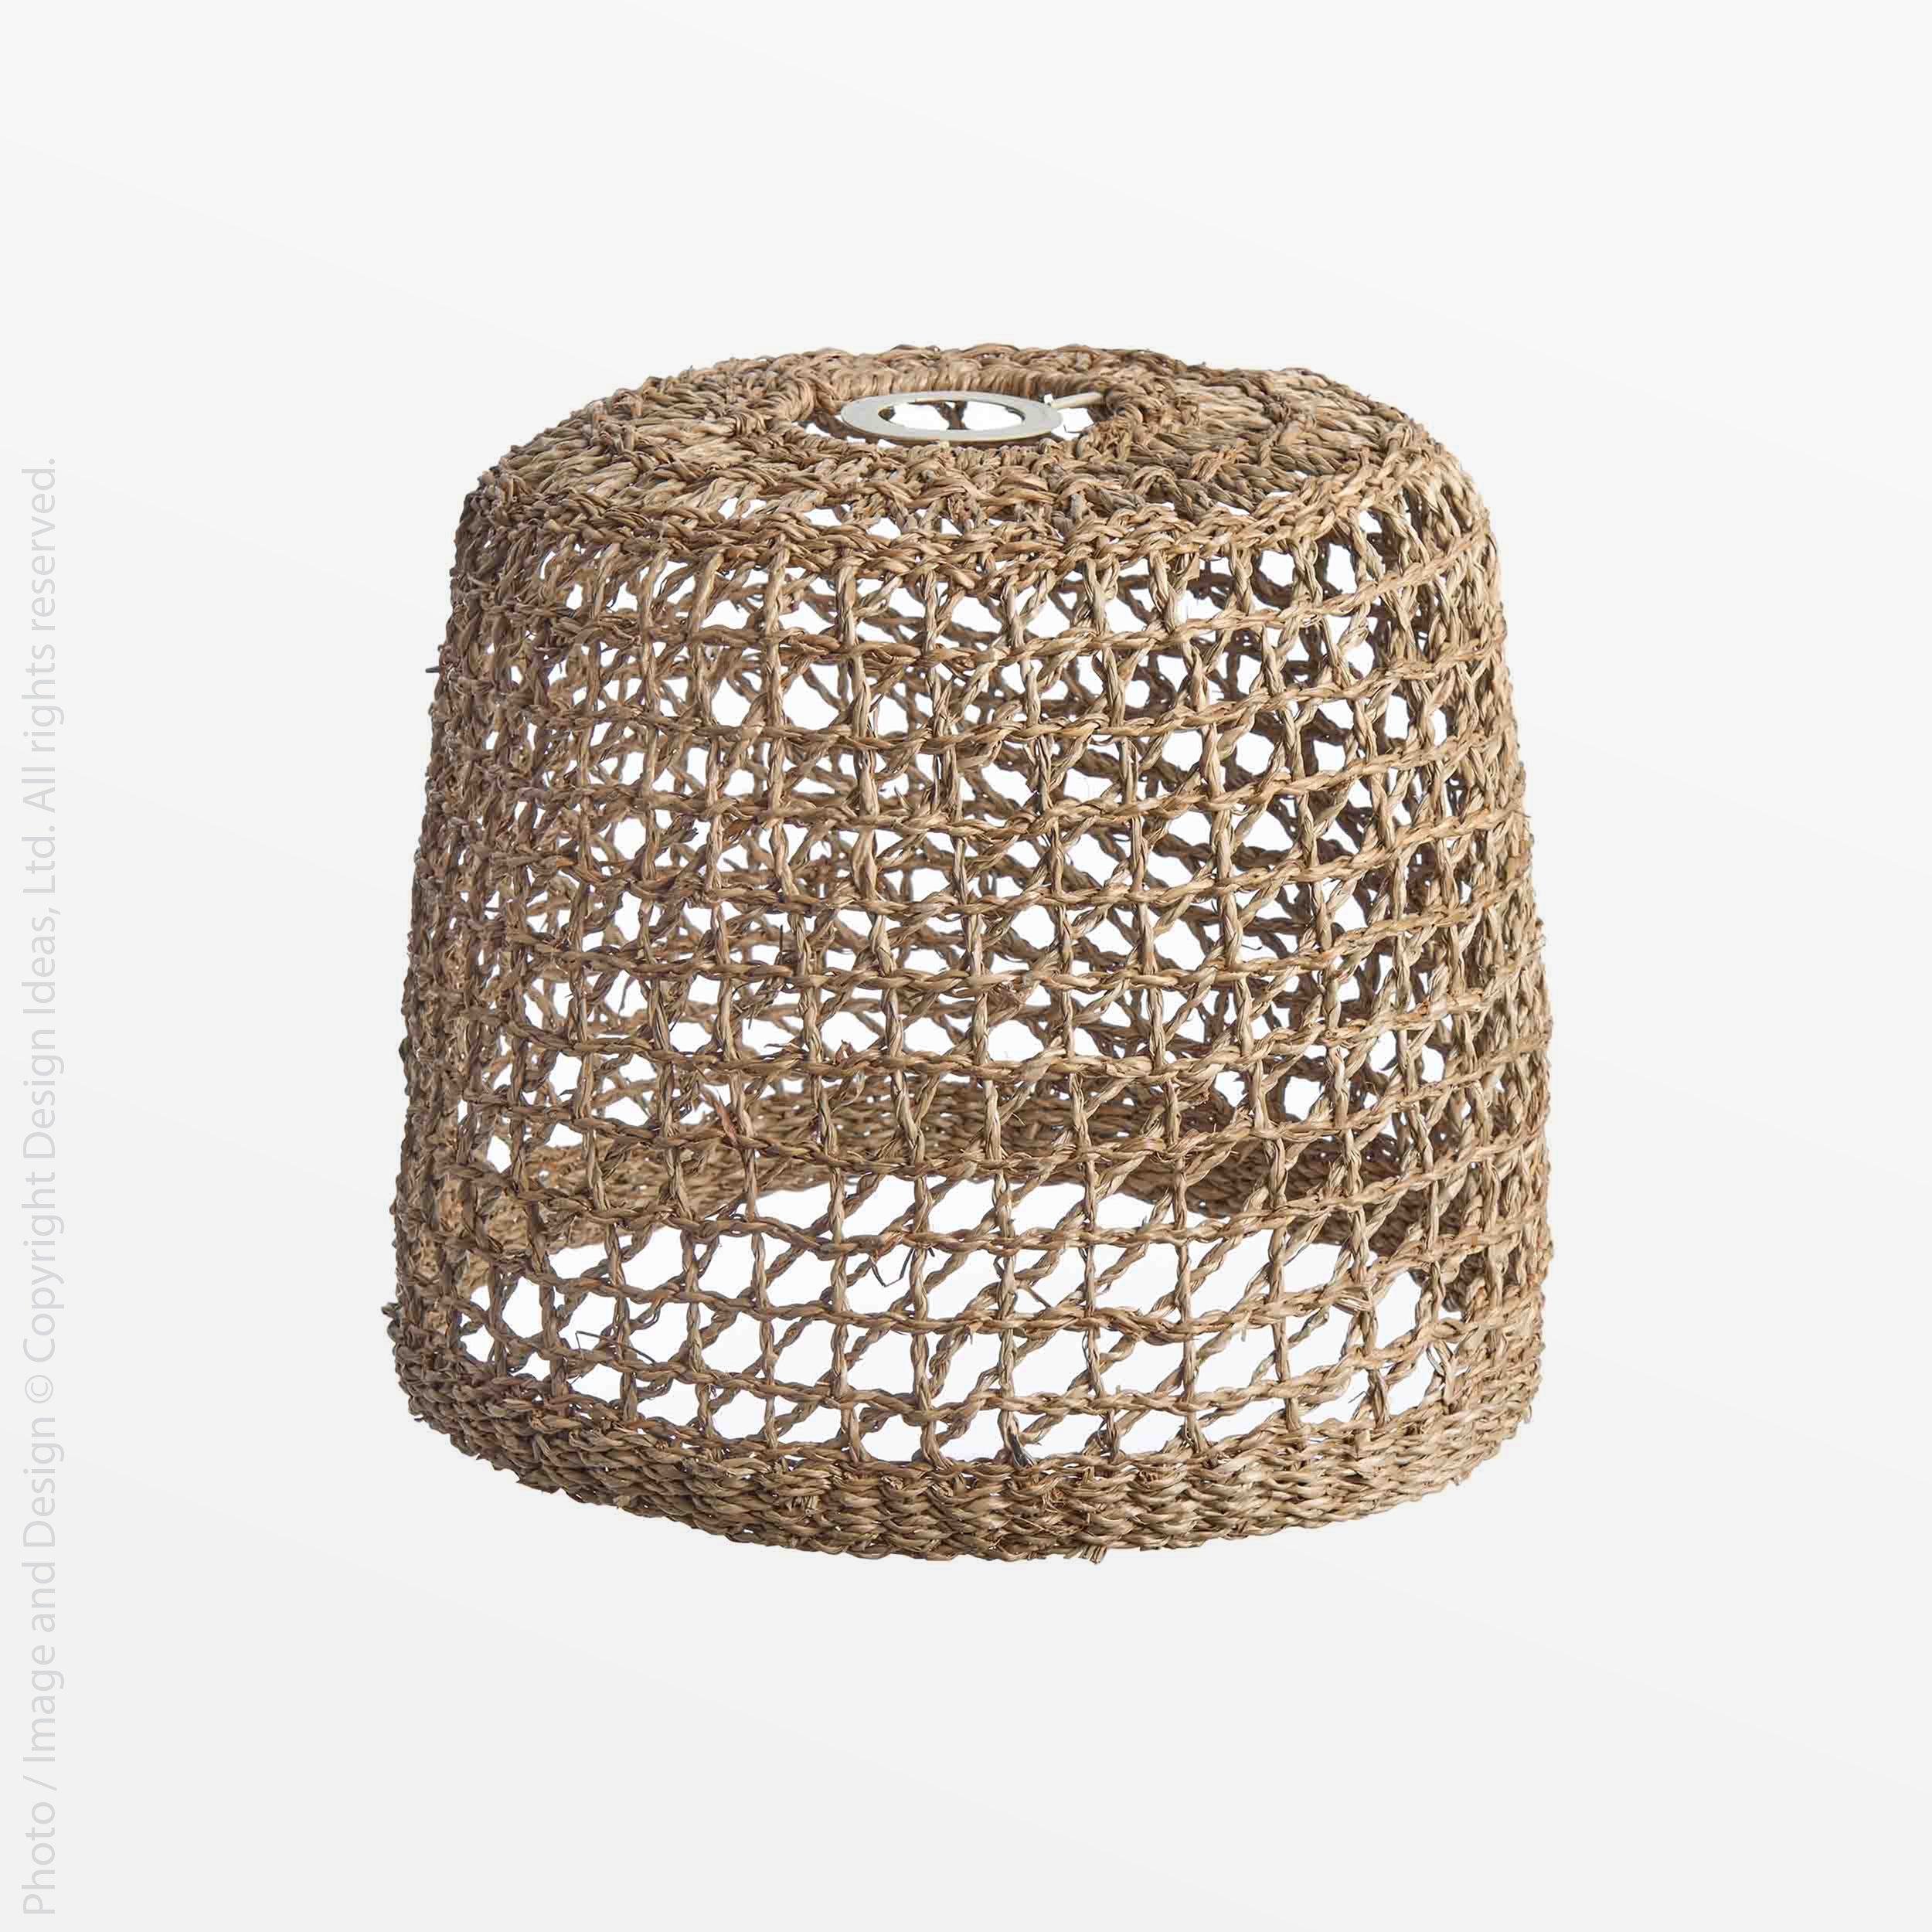 Barletta™ lampshade - Natural | Image 3 | Premium Lampshade from the Barletta collection | made with Sea Grass for long lasting use | texxture